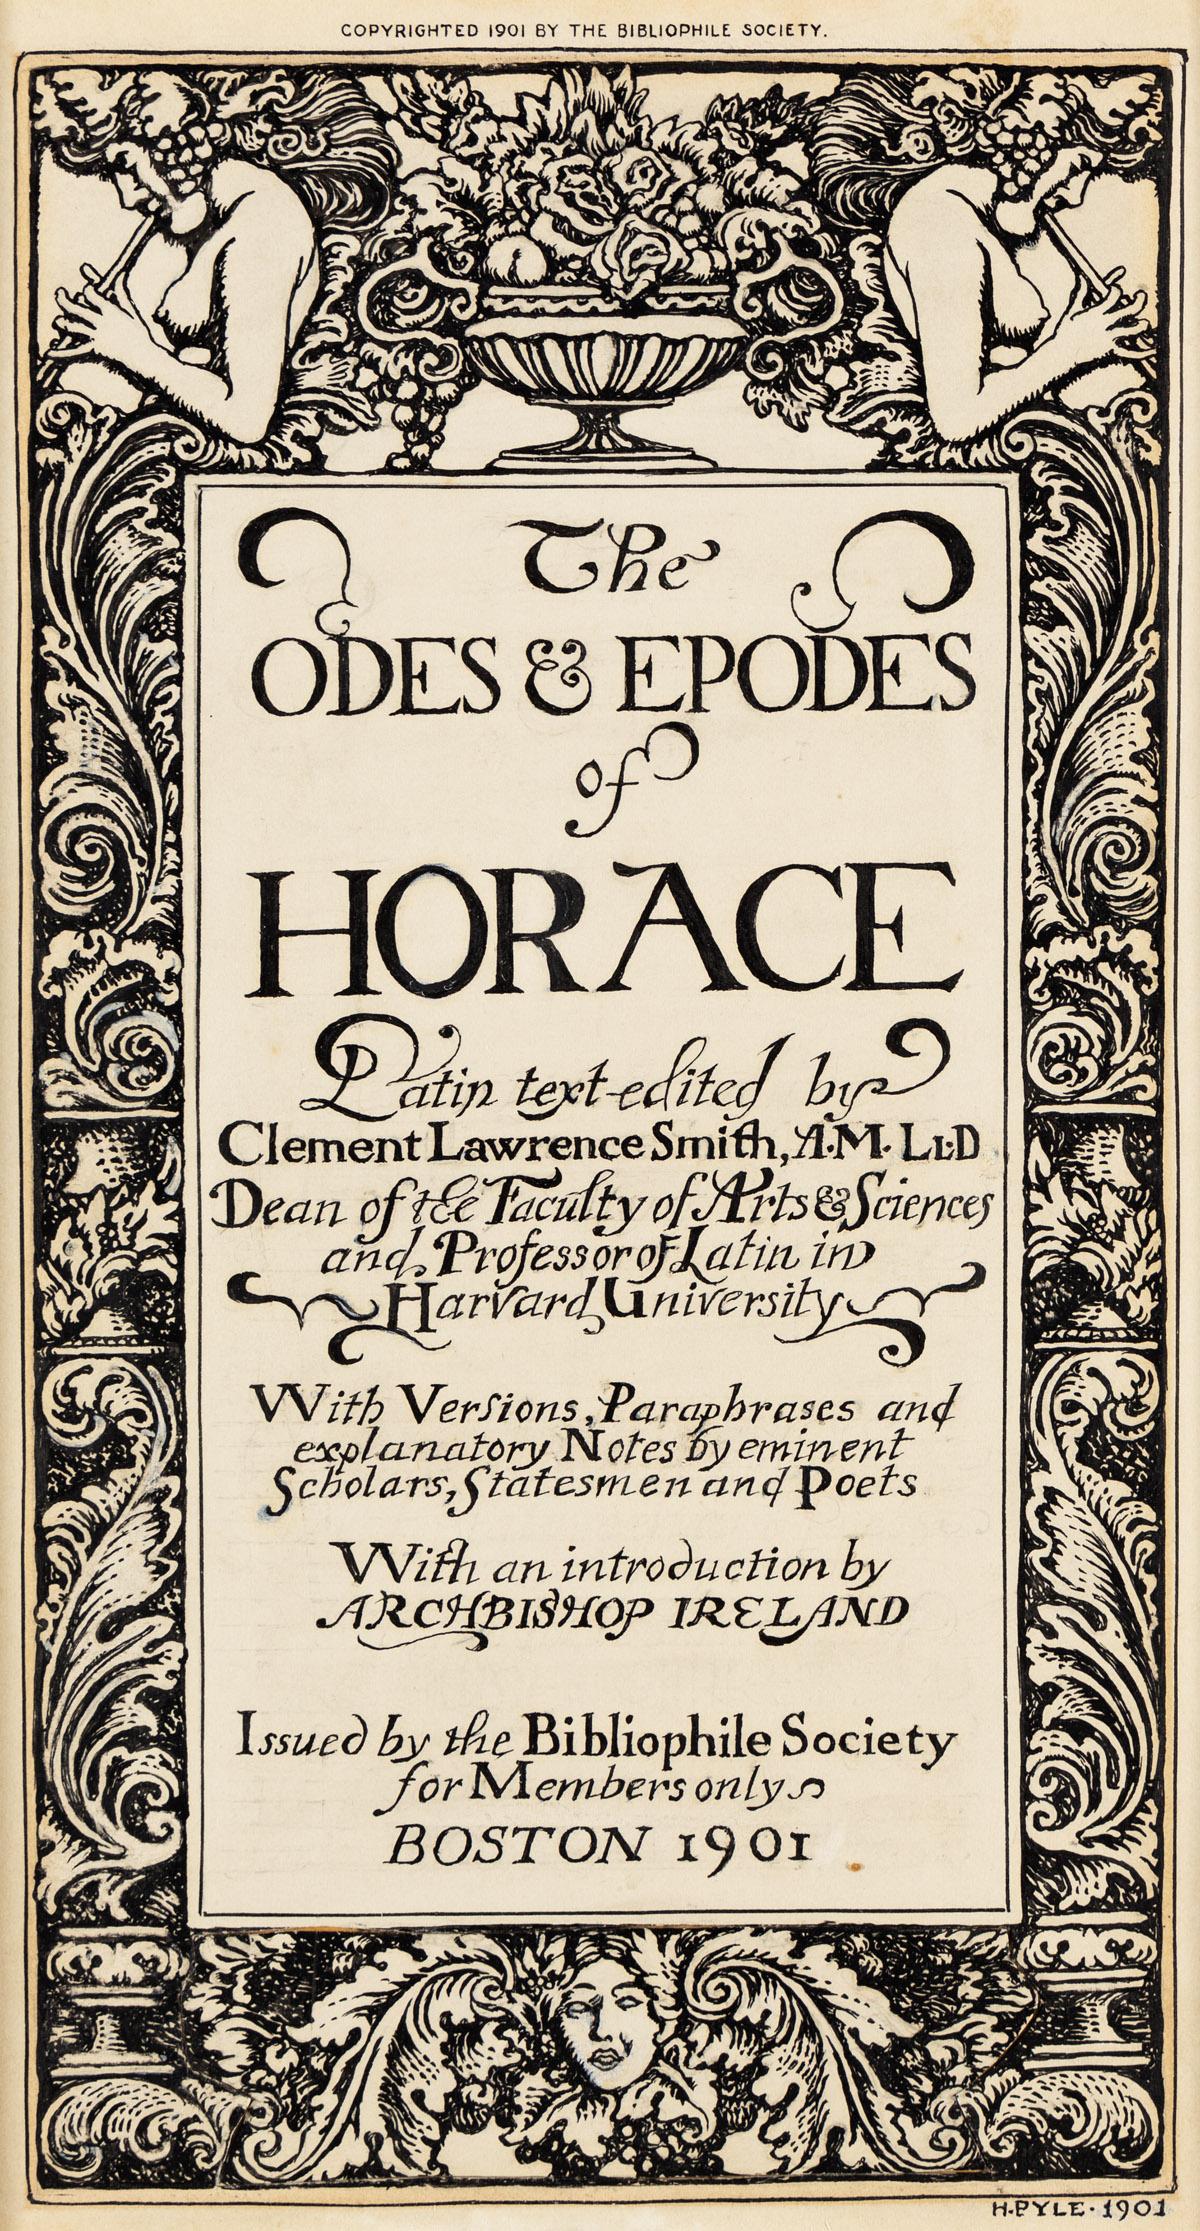 The Odes and Epodes of Horace - Art by Howard Pyle